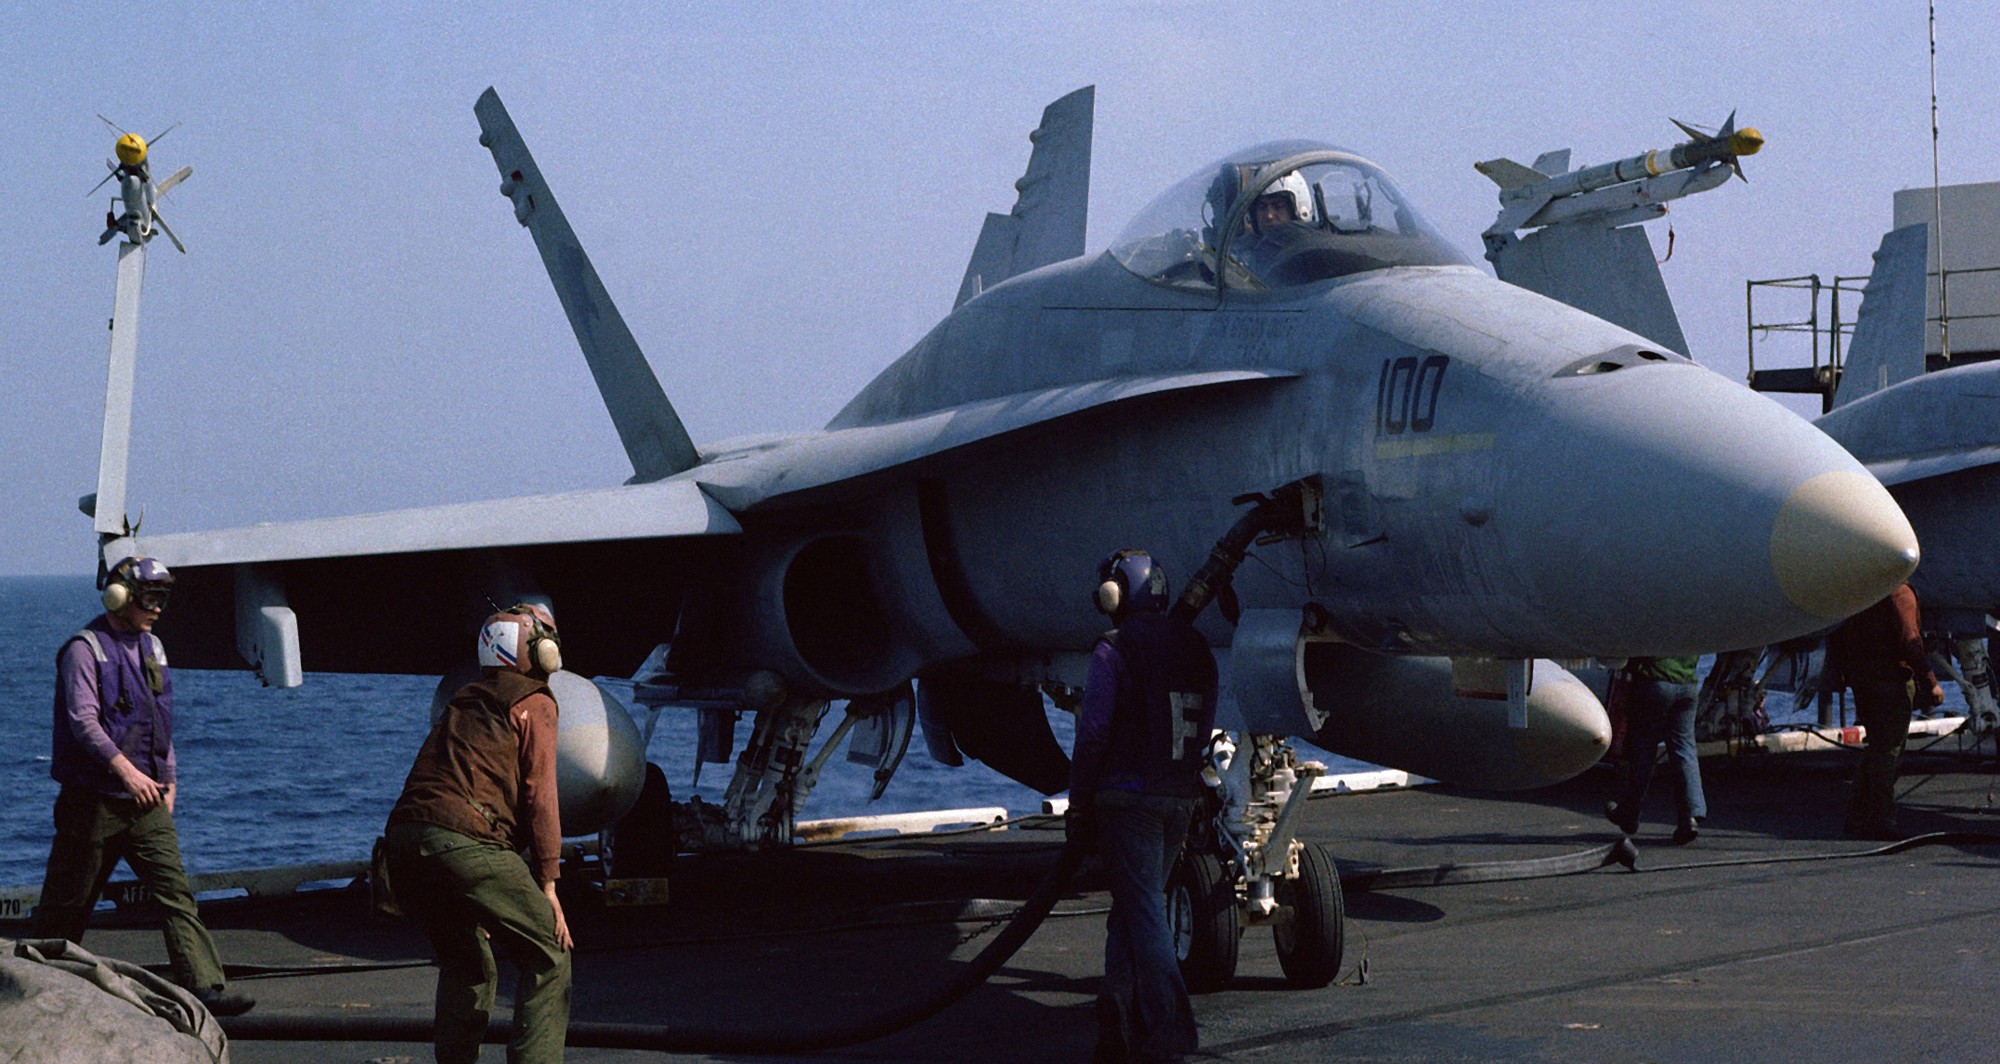 vfa-131 wildcats strike fighter squadron f/a-18c hornet carrier air wing cvw-13 uss coral sea cv-43 1986 136